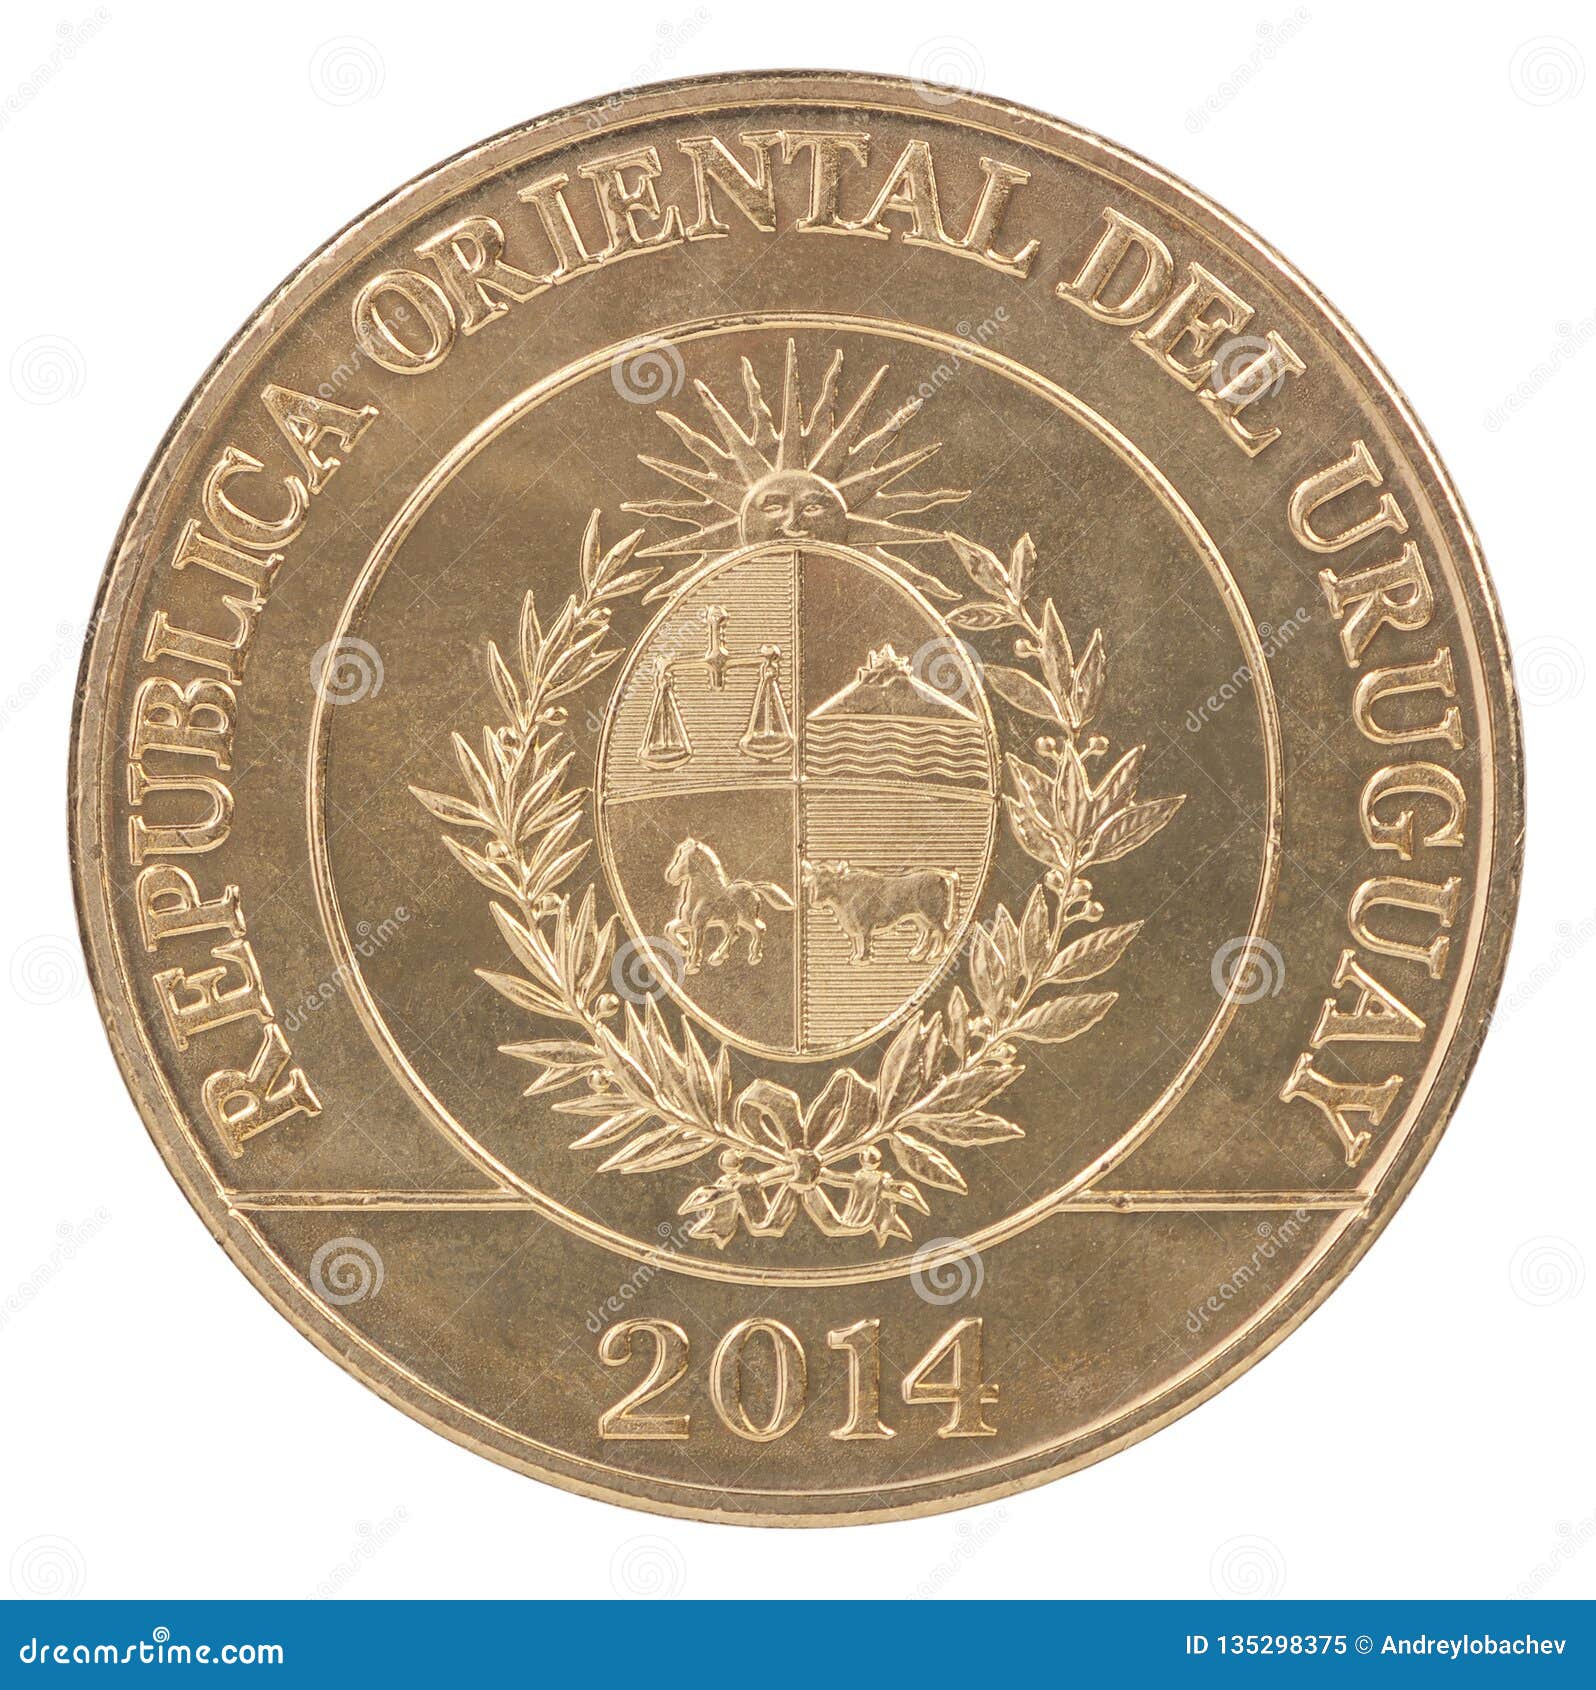 Uruguayan Peso Coin stock image. Image of bronze, arms ...